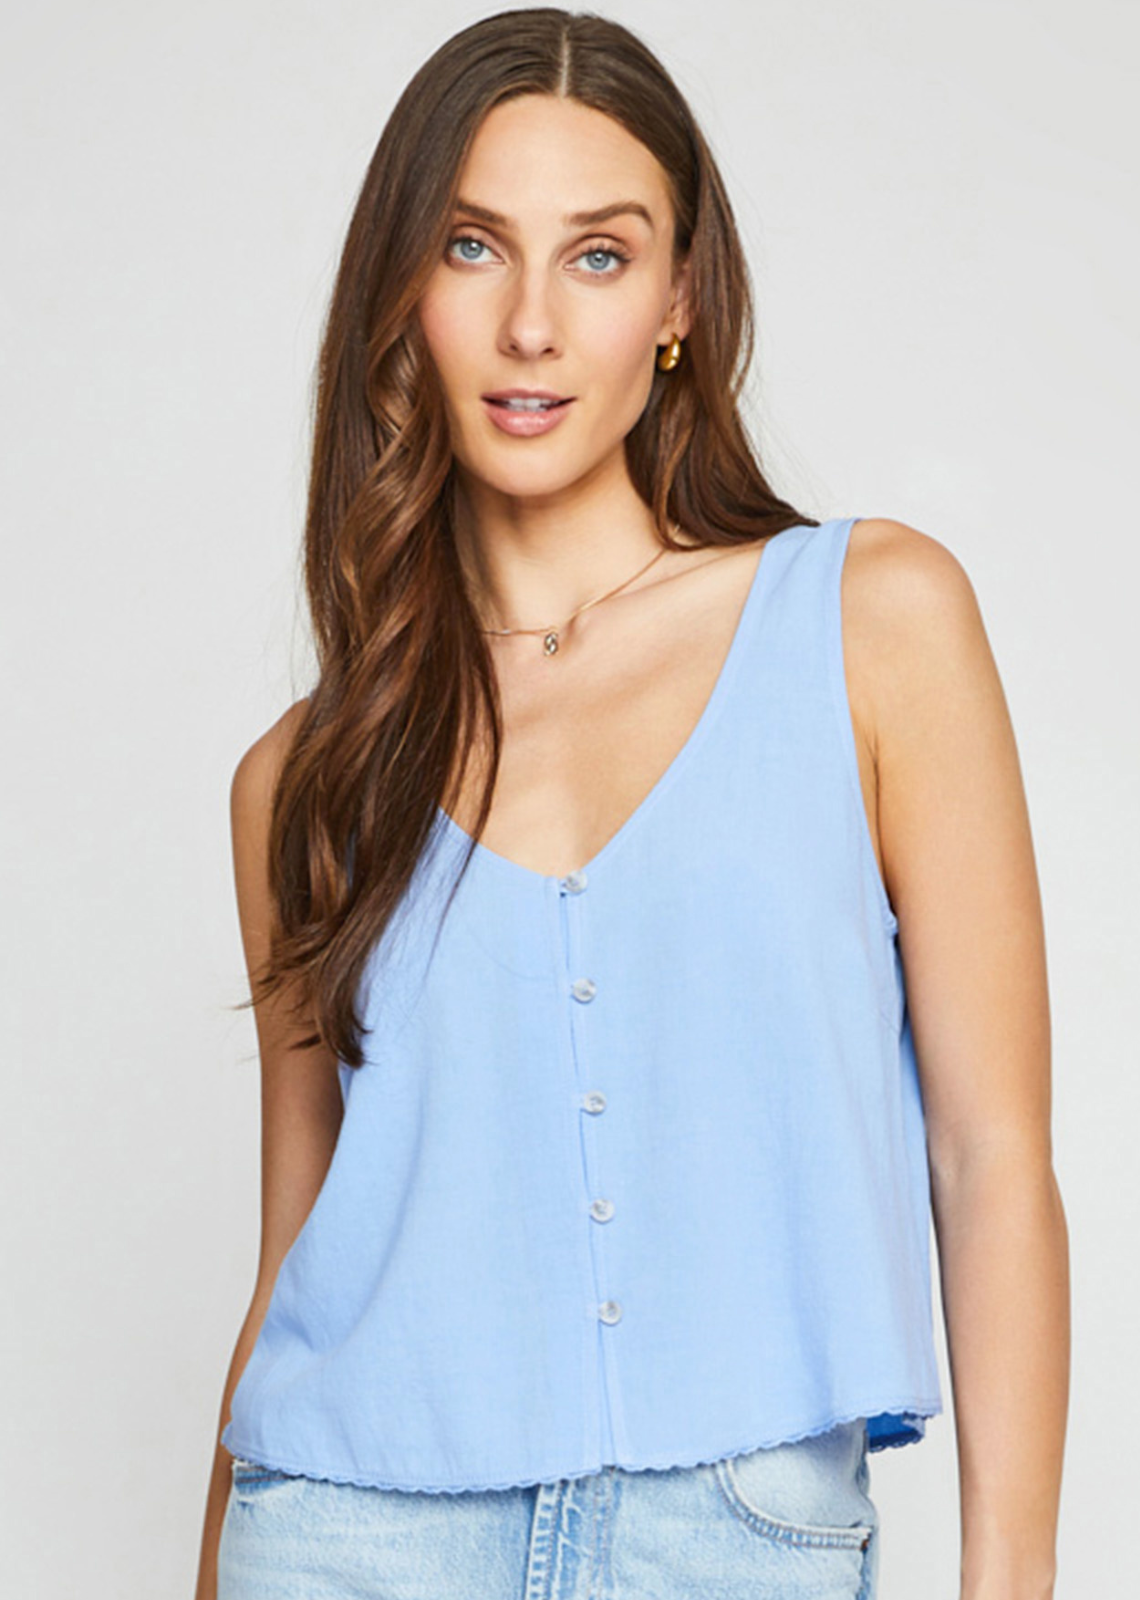 Free People Seamless V-Neck Cami for Women - Sleek Style, Plunging Neckline  & Flattering Silhouette 